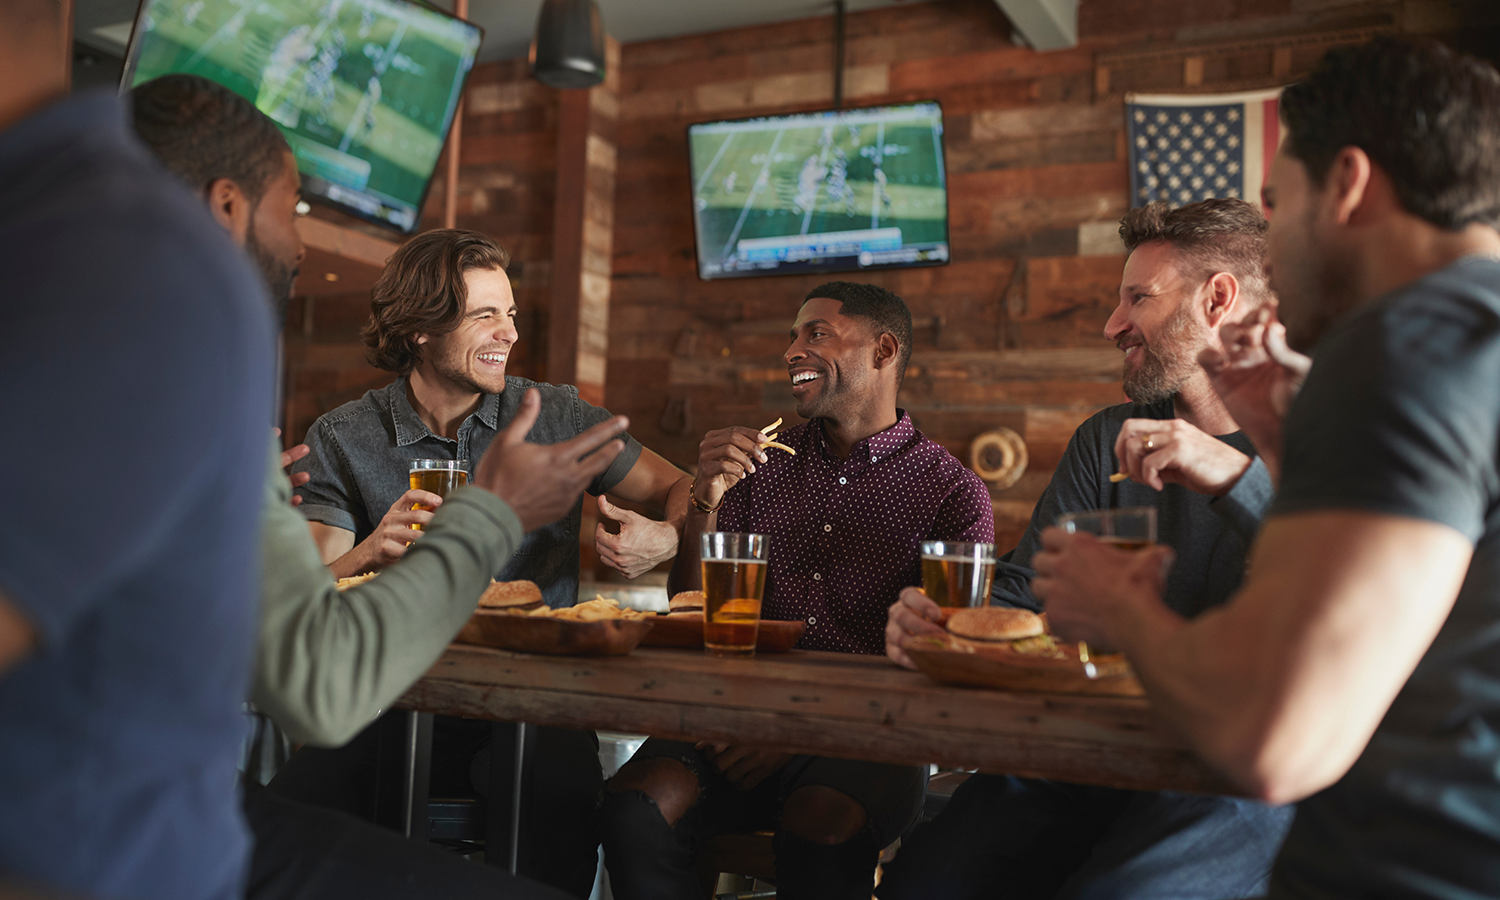 Group of young male sports fans watching professional football on TV while chatting and enjoying beer & apps